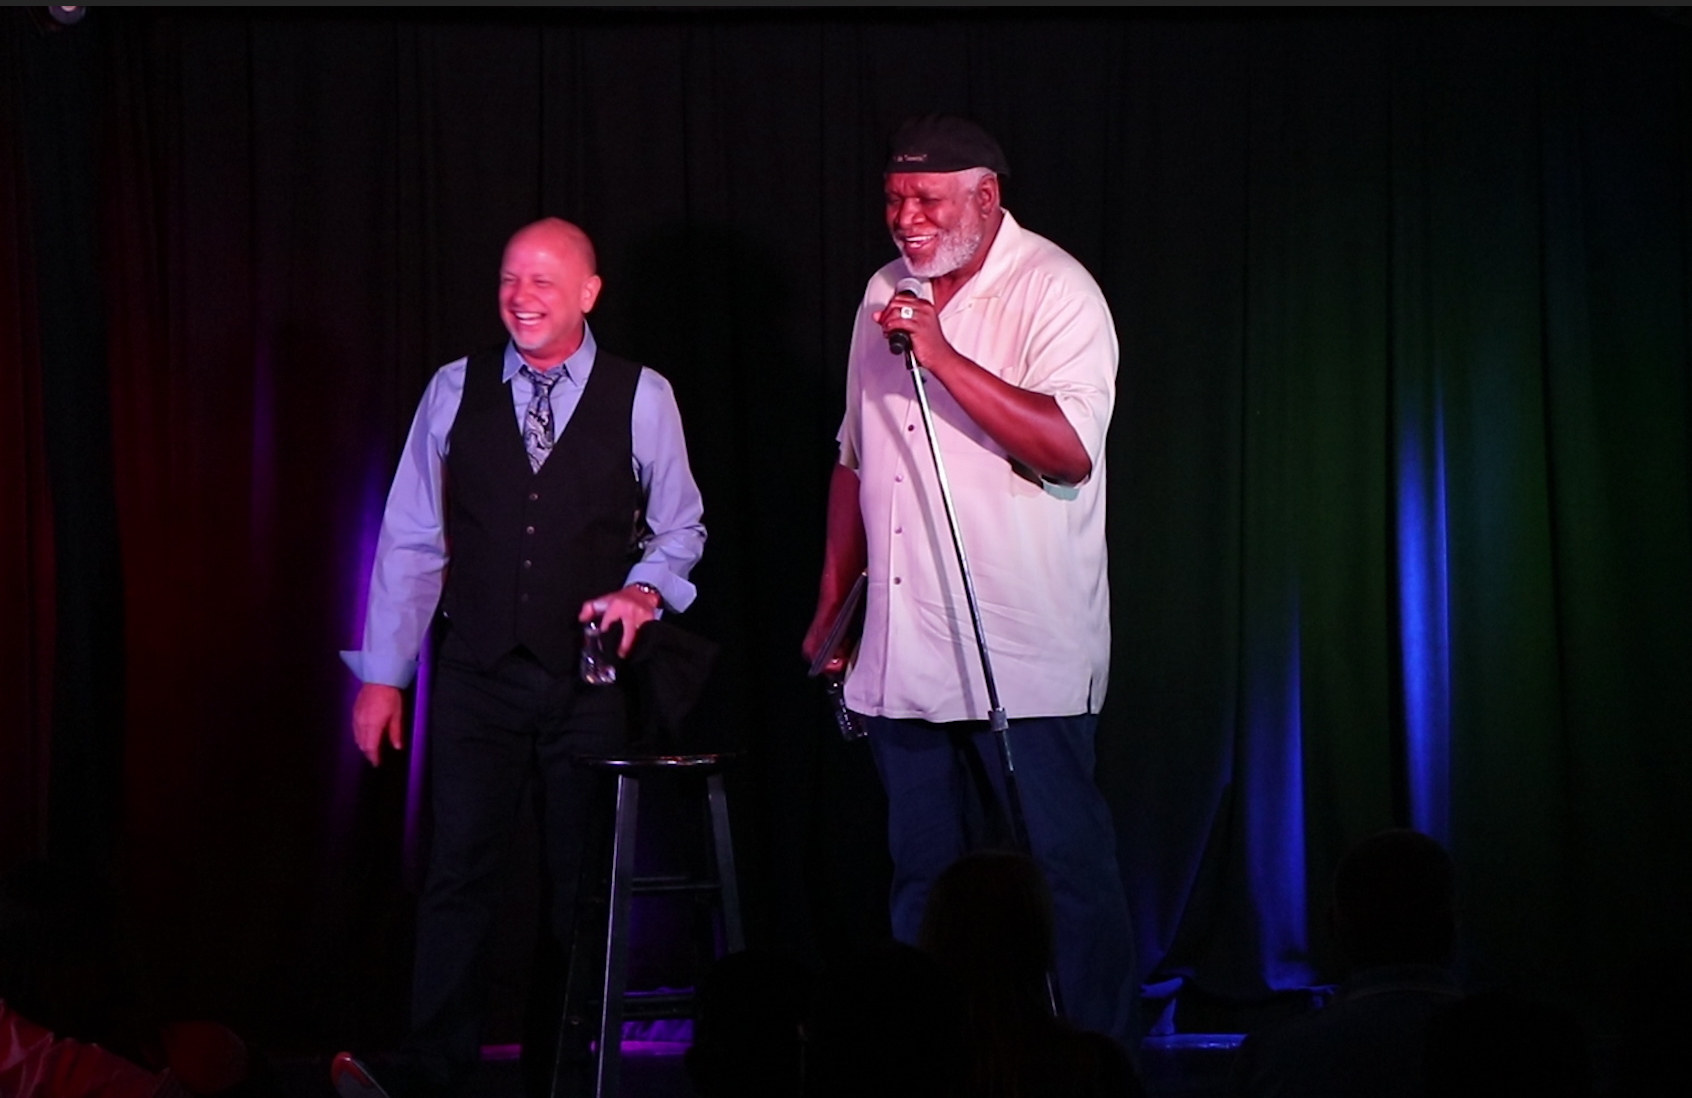 Jokesters Comedy Club - Don Barnhart and George Wallace 